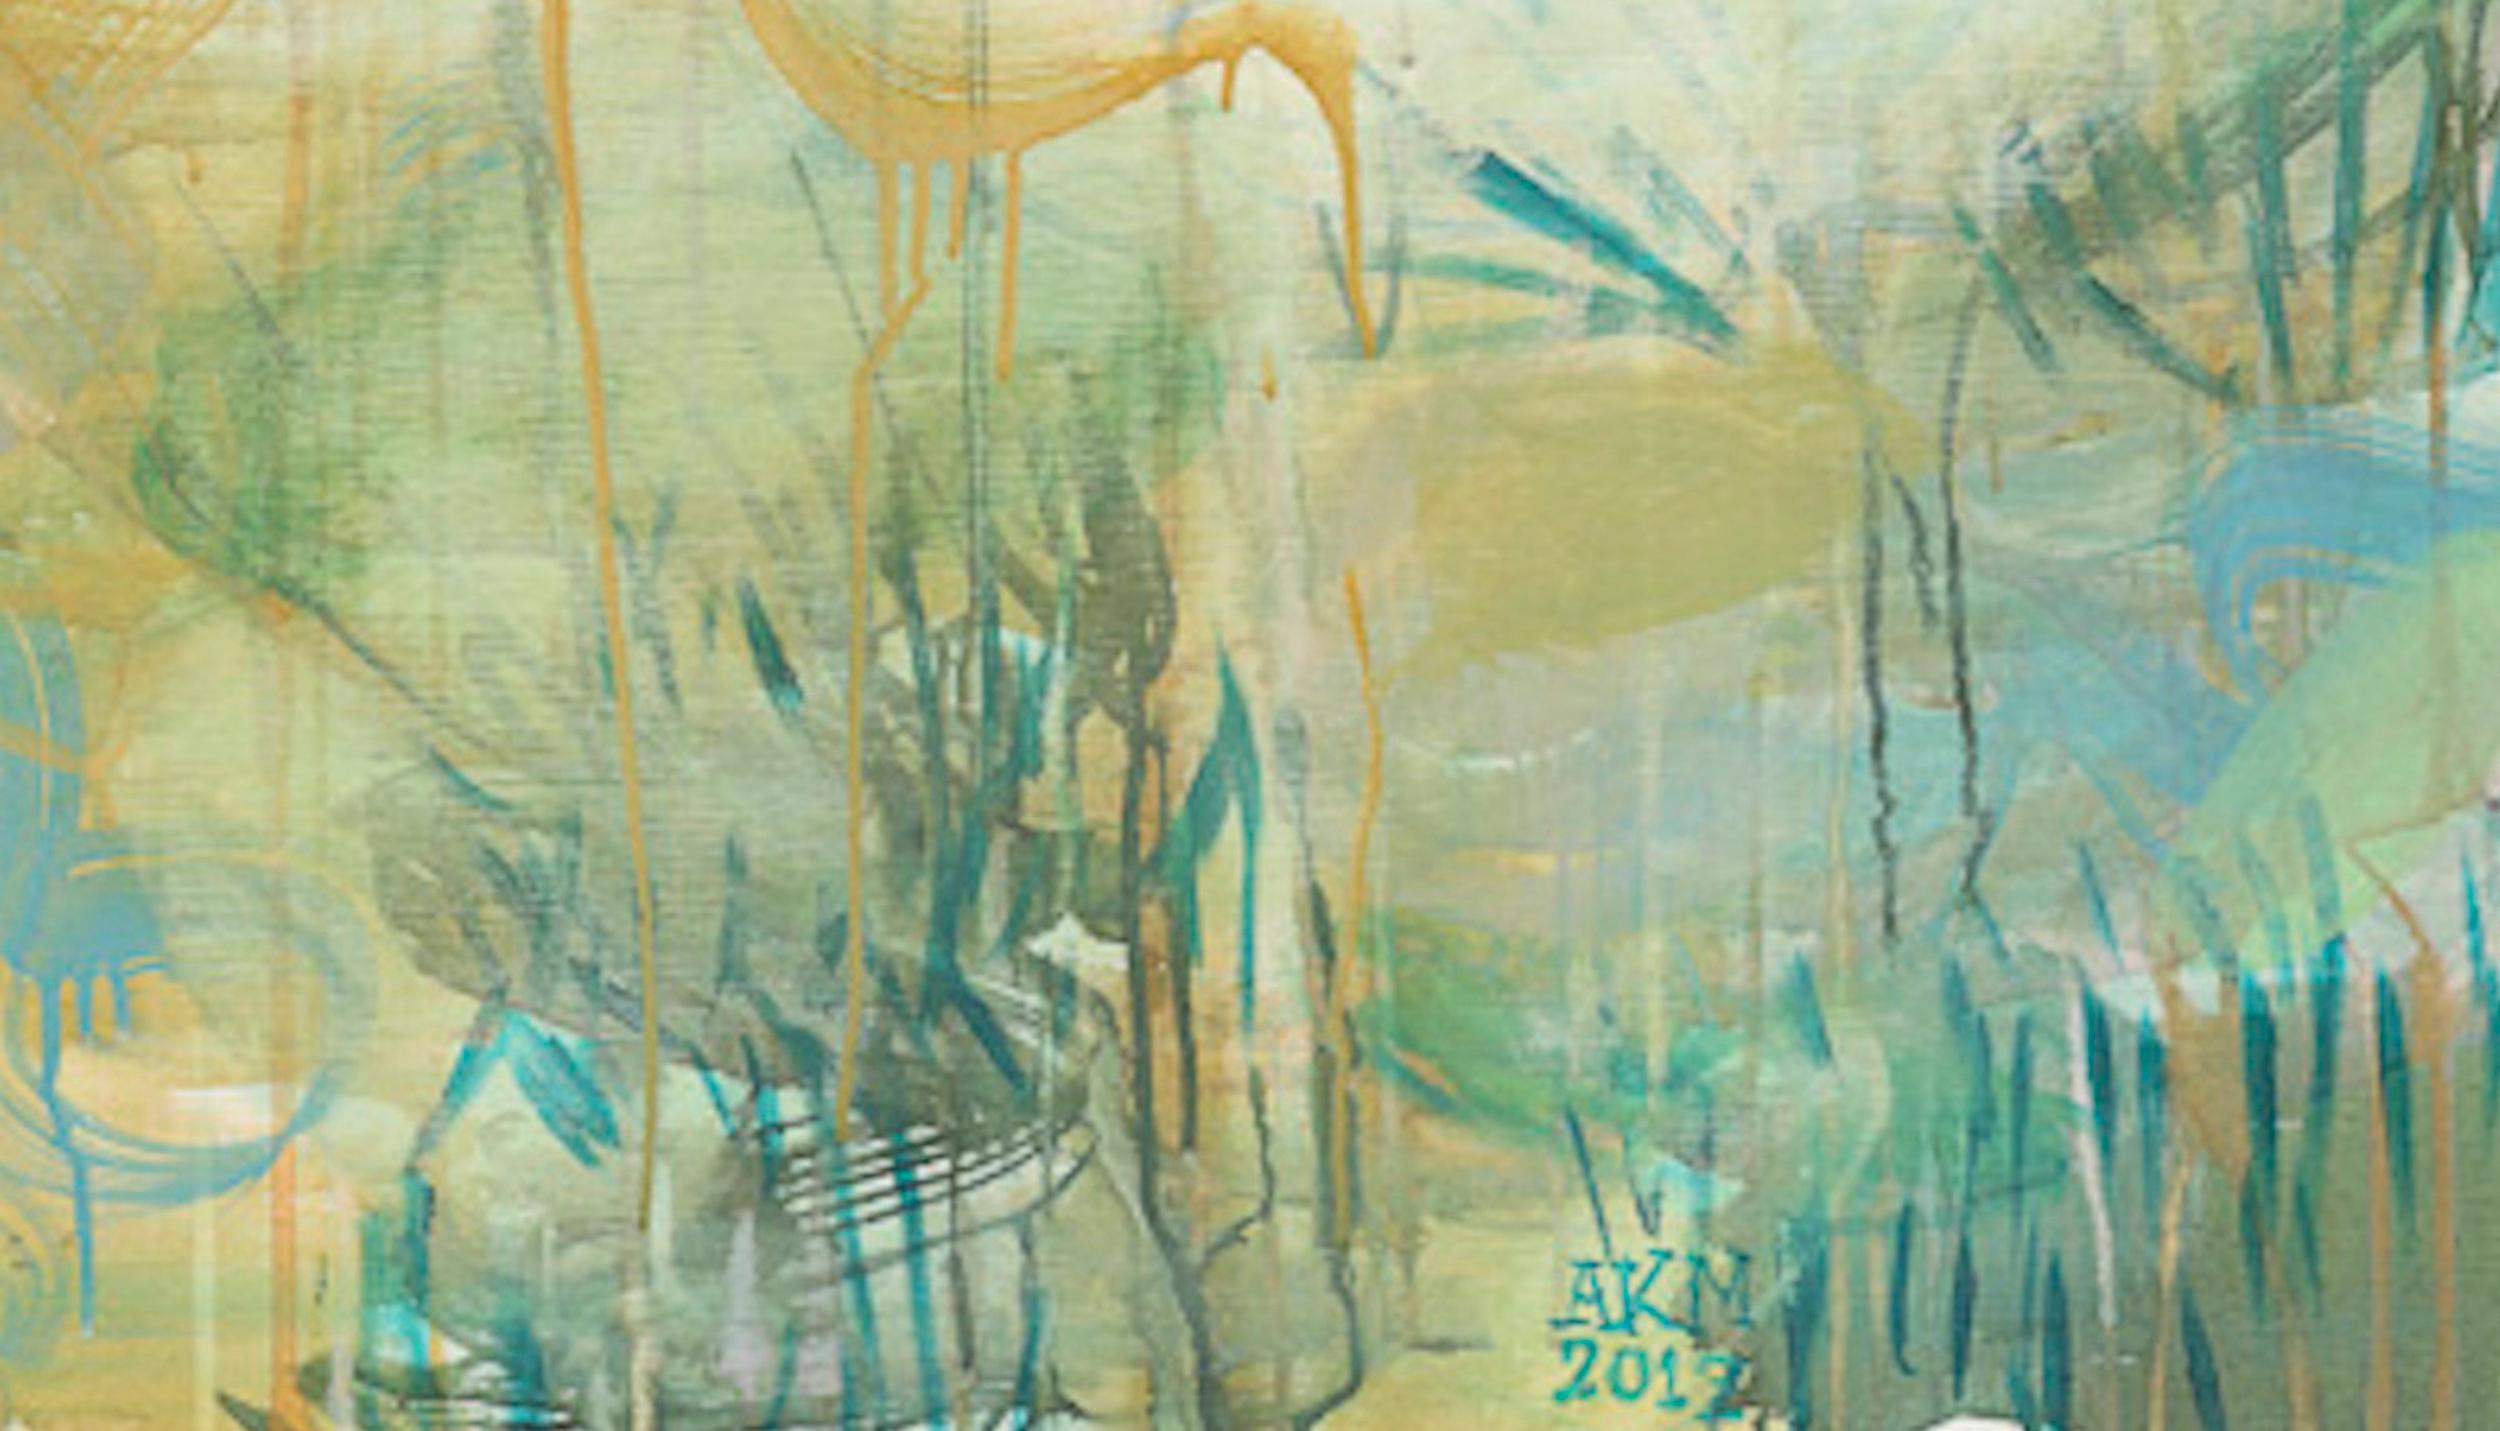  Large Abstract Nature Painting on Canvas, Mixed Media Green, Pink, Blue, Gold - Gray Landscape Painting by Alex K. Mason